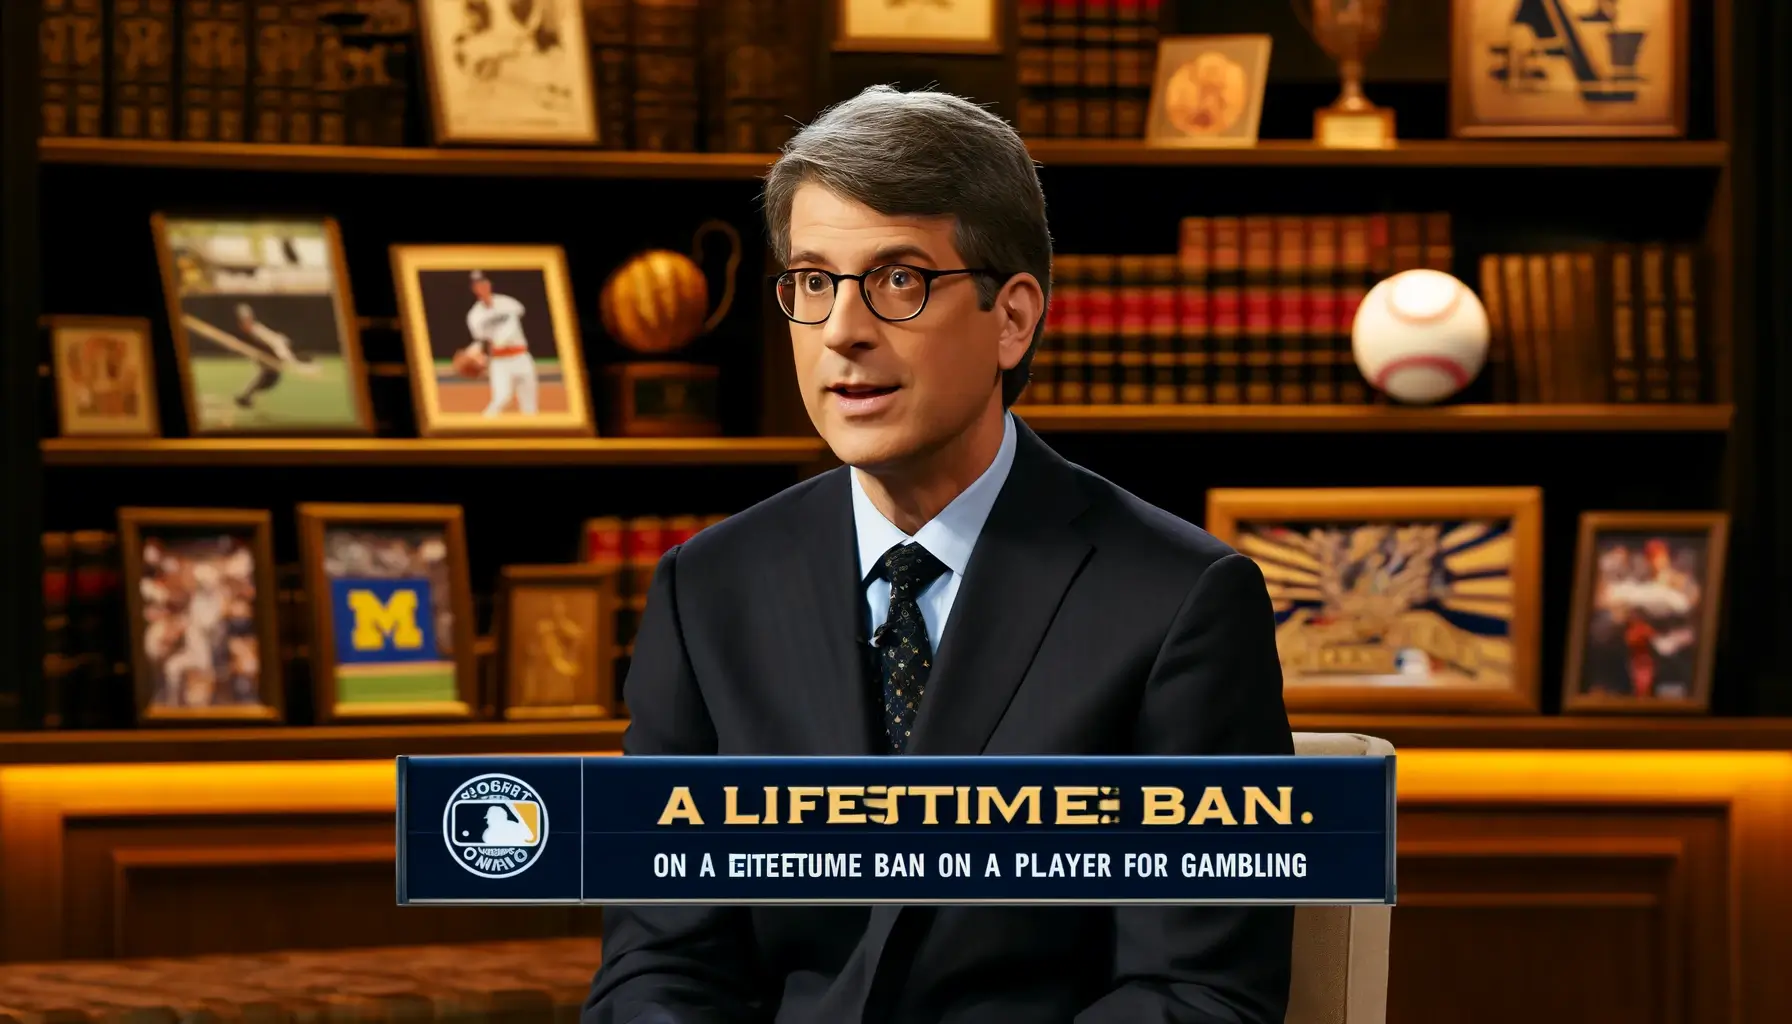 An image of Dr. Mark Evans, a sports law expert from the University of Michigan, speaking in a studio. The setting includes university emblems and bookshelves filled with sports law literature. Dr. Evans, a middle-aged man with glasses and a professional demeanor, is in mid-conversation, providing analysis on the implications of a lifetime ban on a player for gambling.